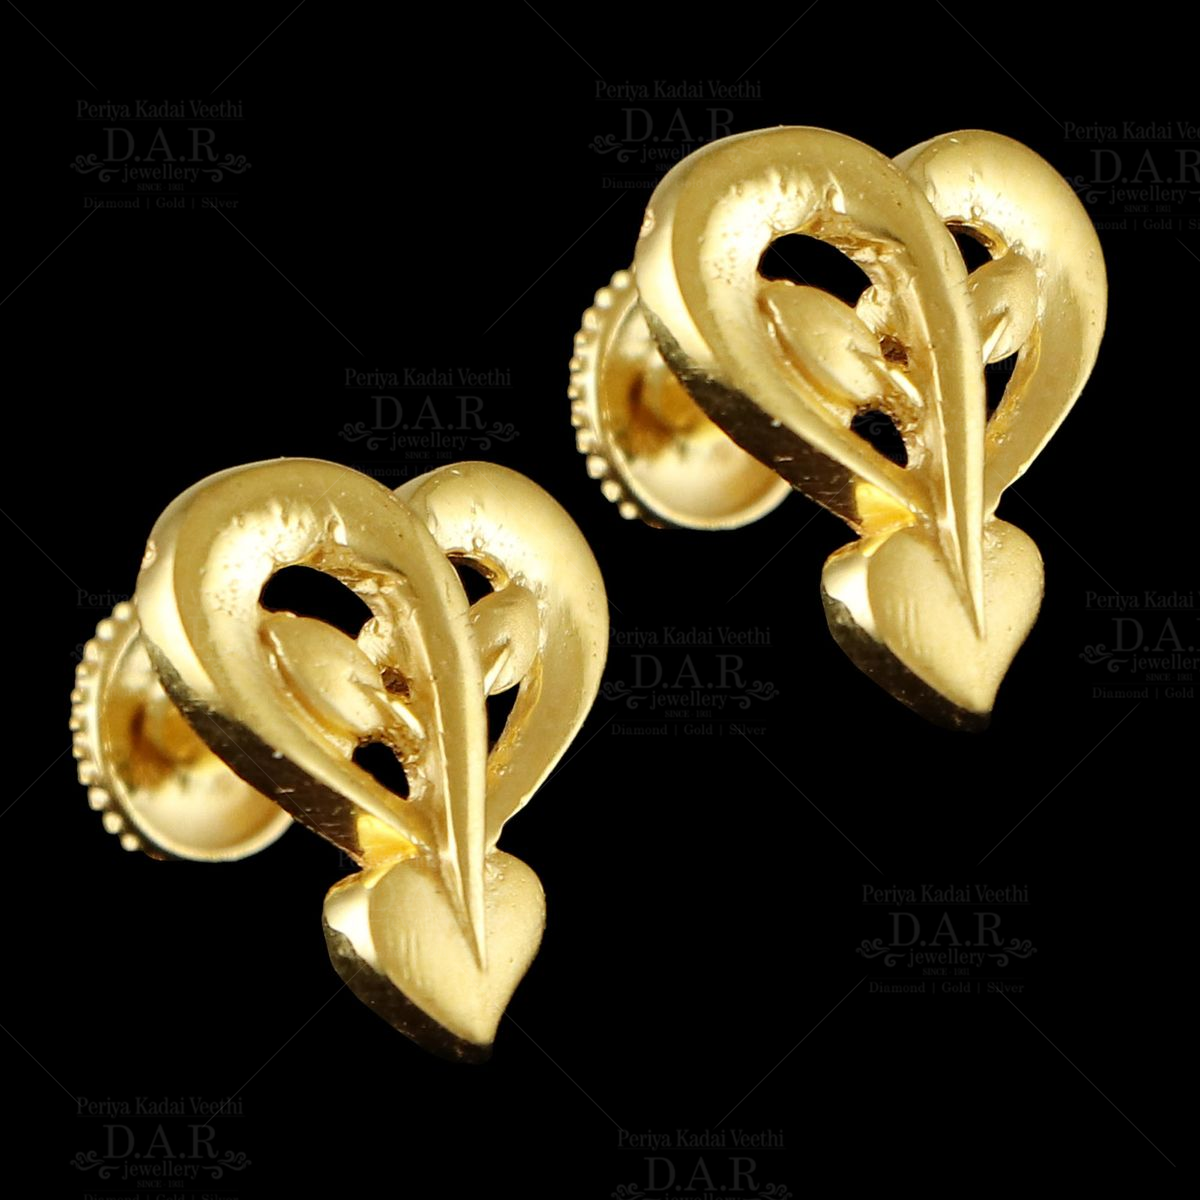 Update more than 105 earrings in anjali jewellers latest